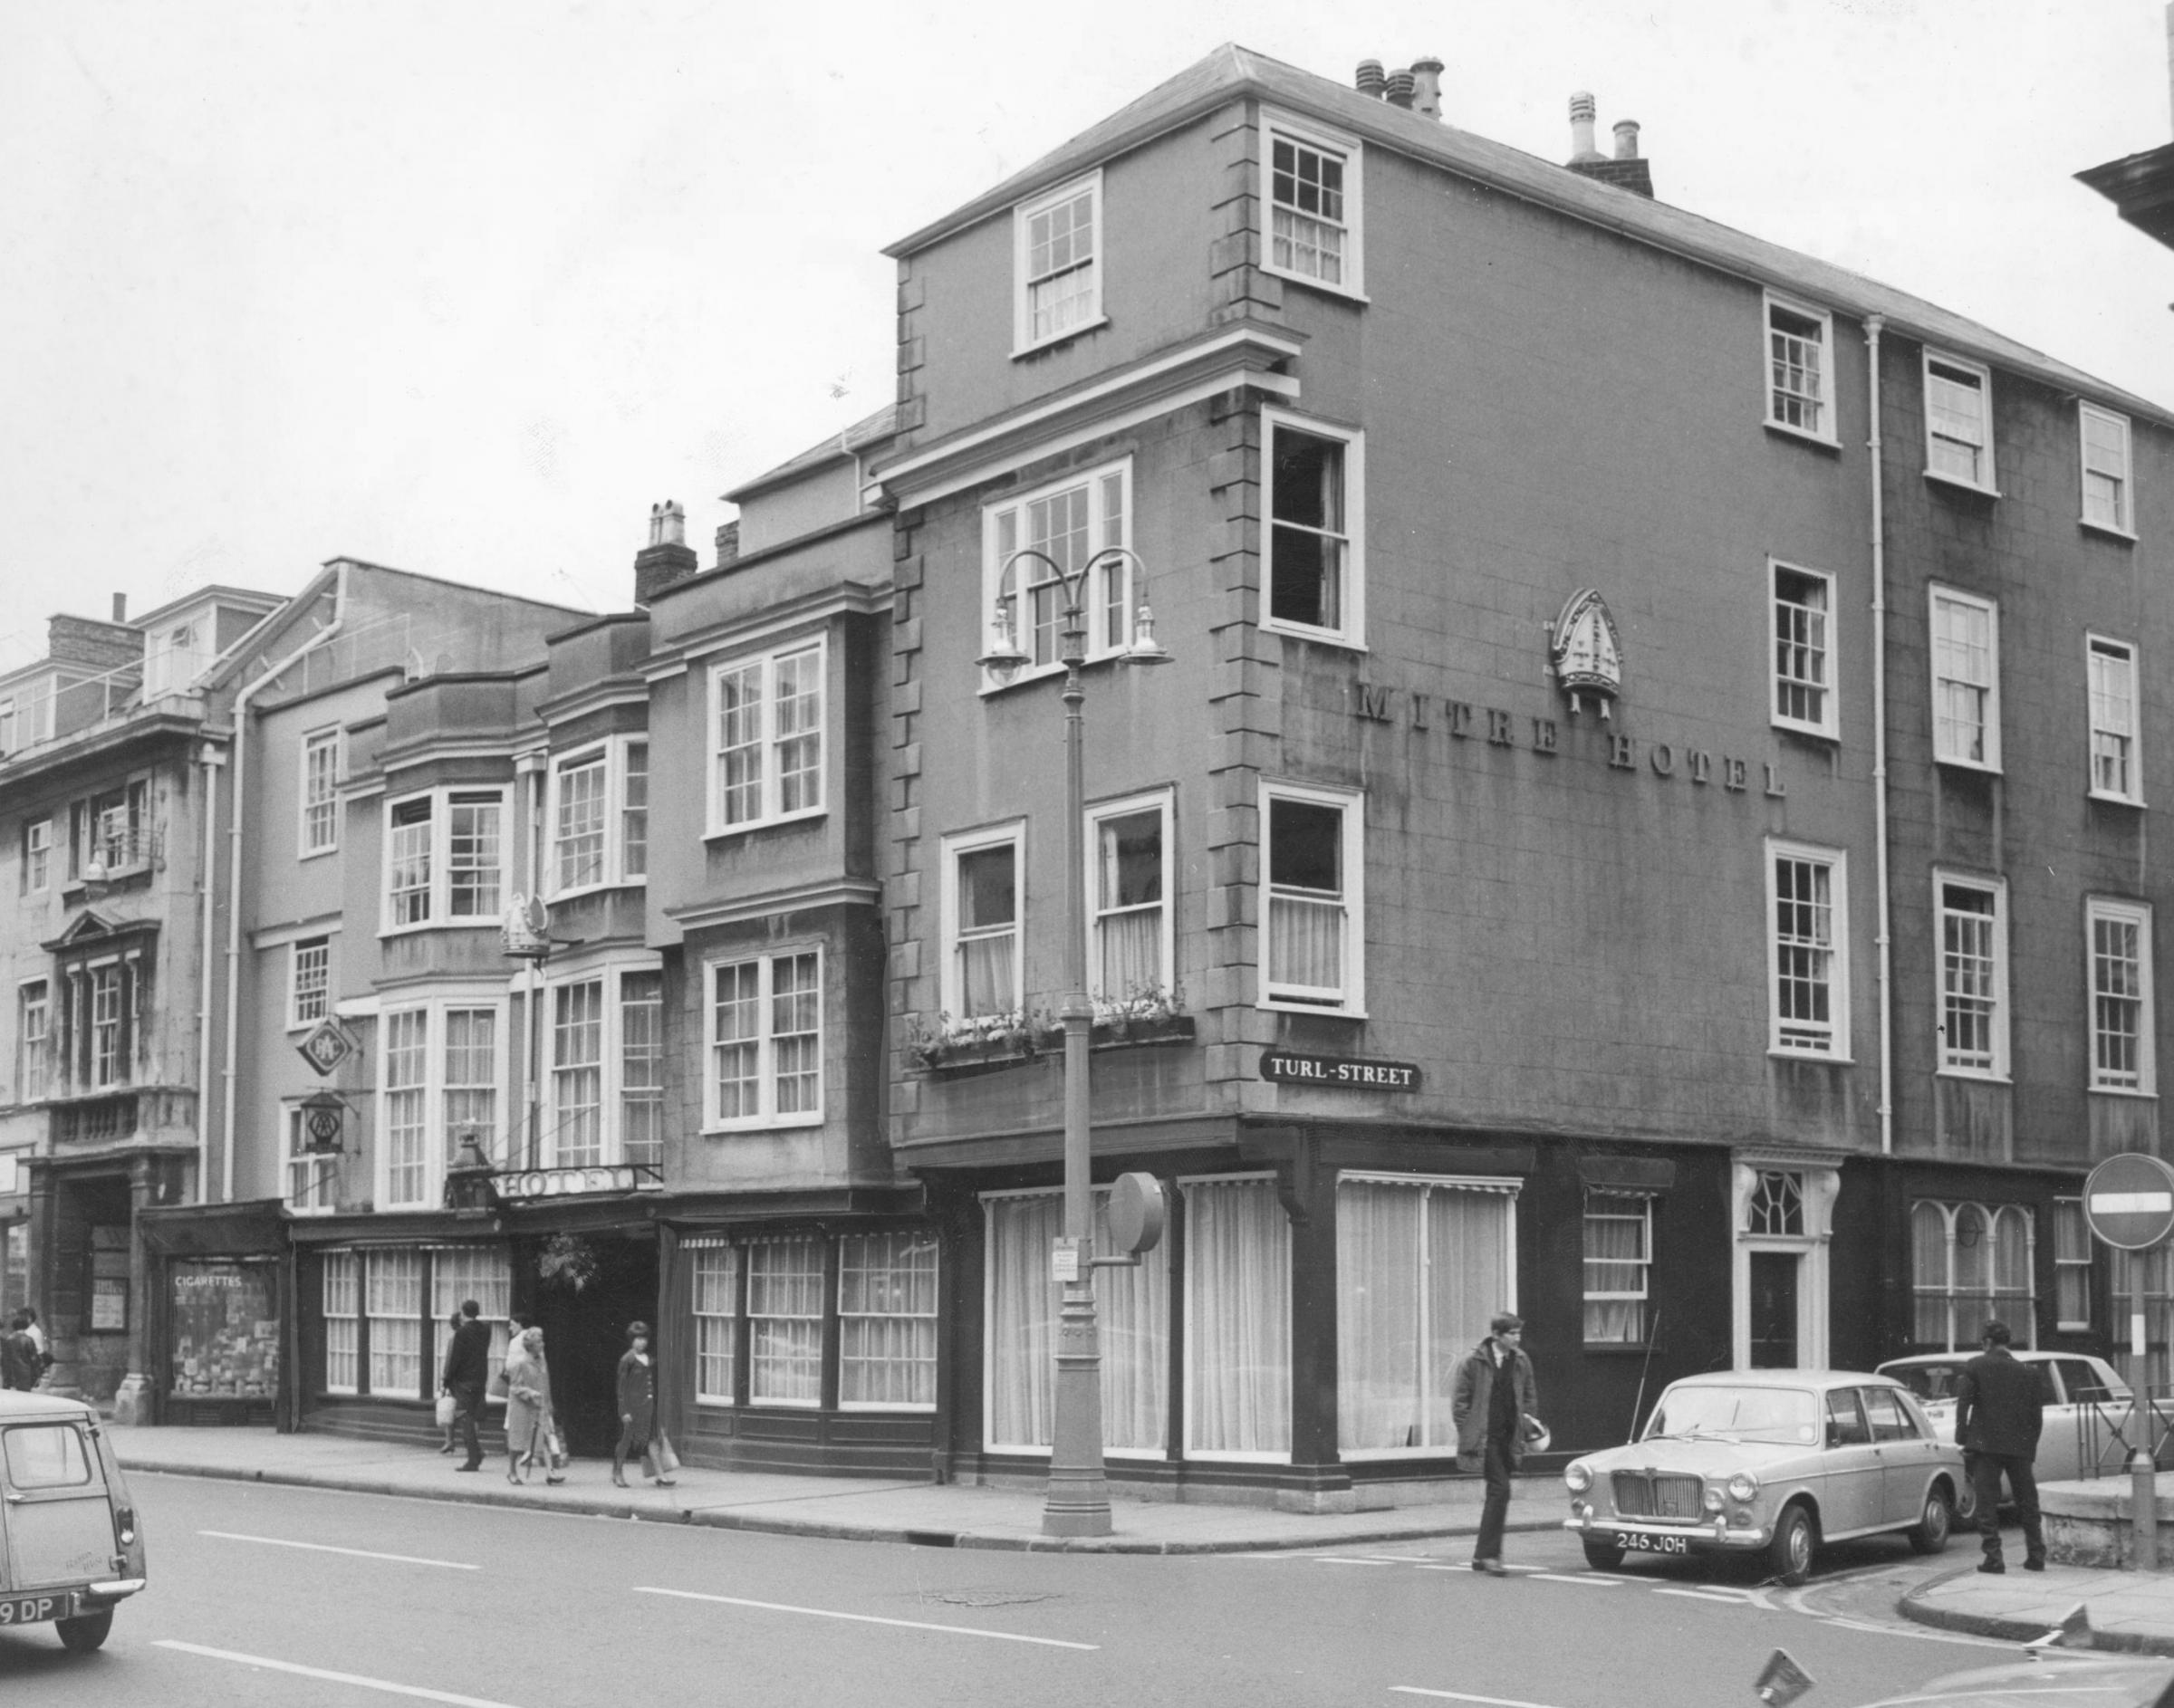 The Mitre Inn closed as a hotel in 1968